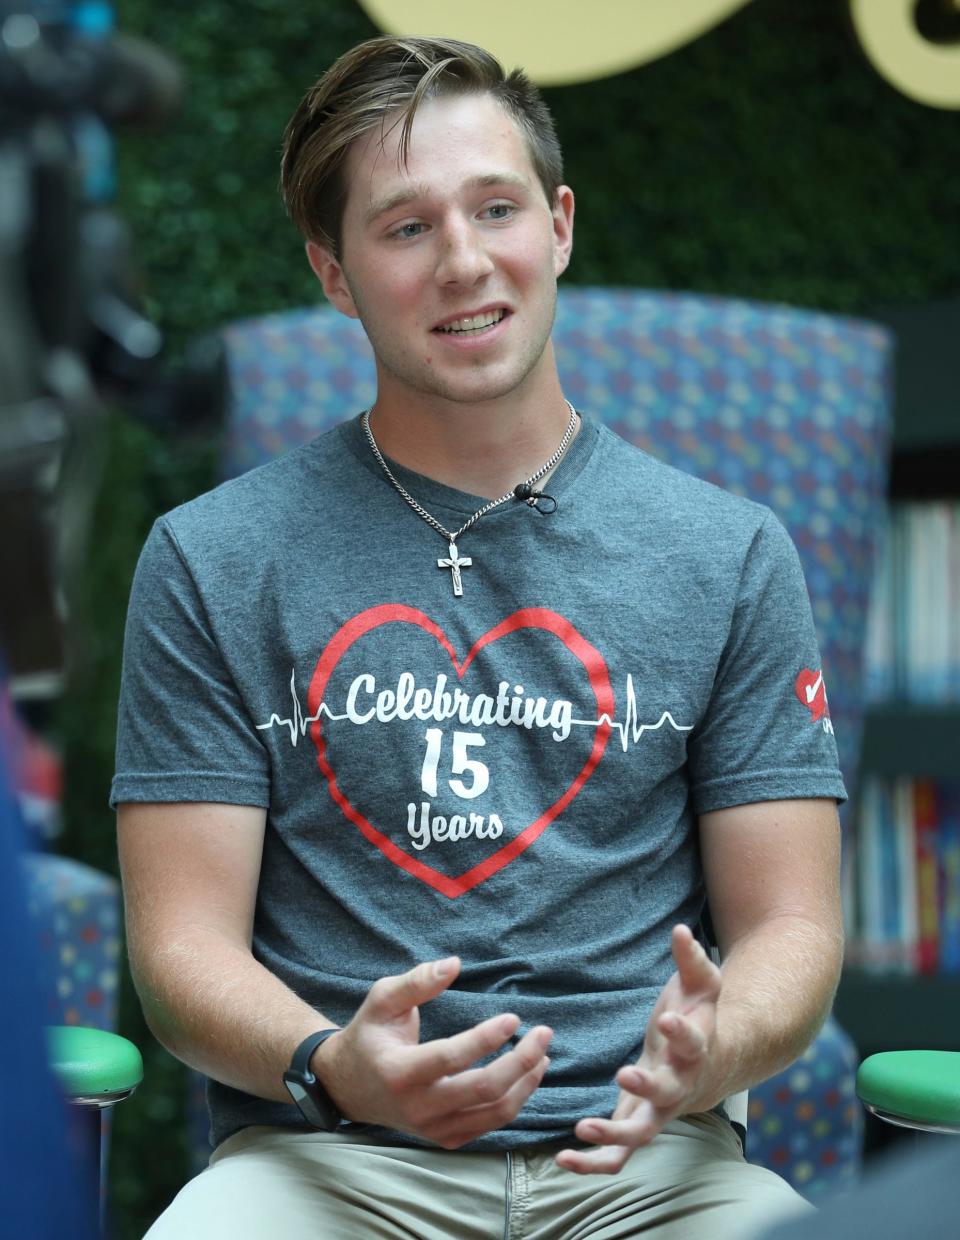 Alex Bowerson, 18, experienced sudden cardiac arrest during wrestling practice at Memphis High School talks about the importance of having AED devices like the one used to shock his heart out of its fatal rhythm in schools Thursday, July 20, 2023.